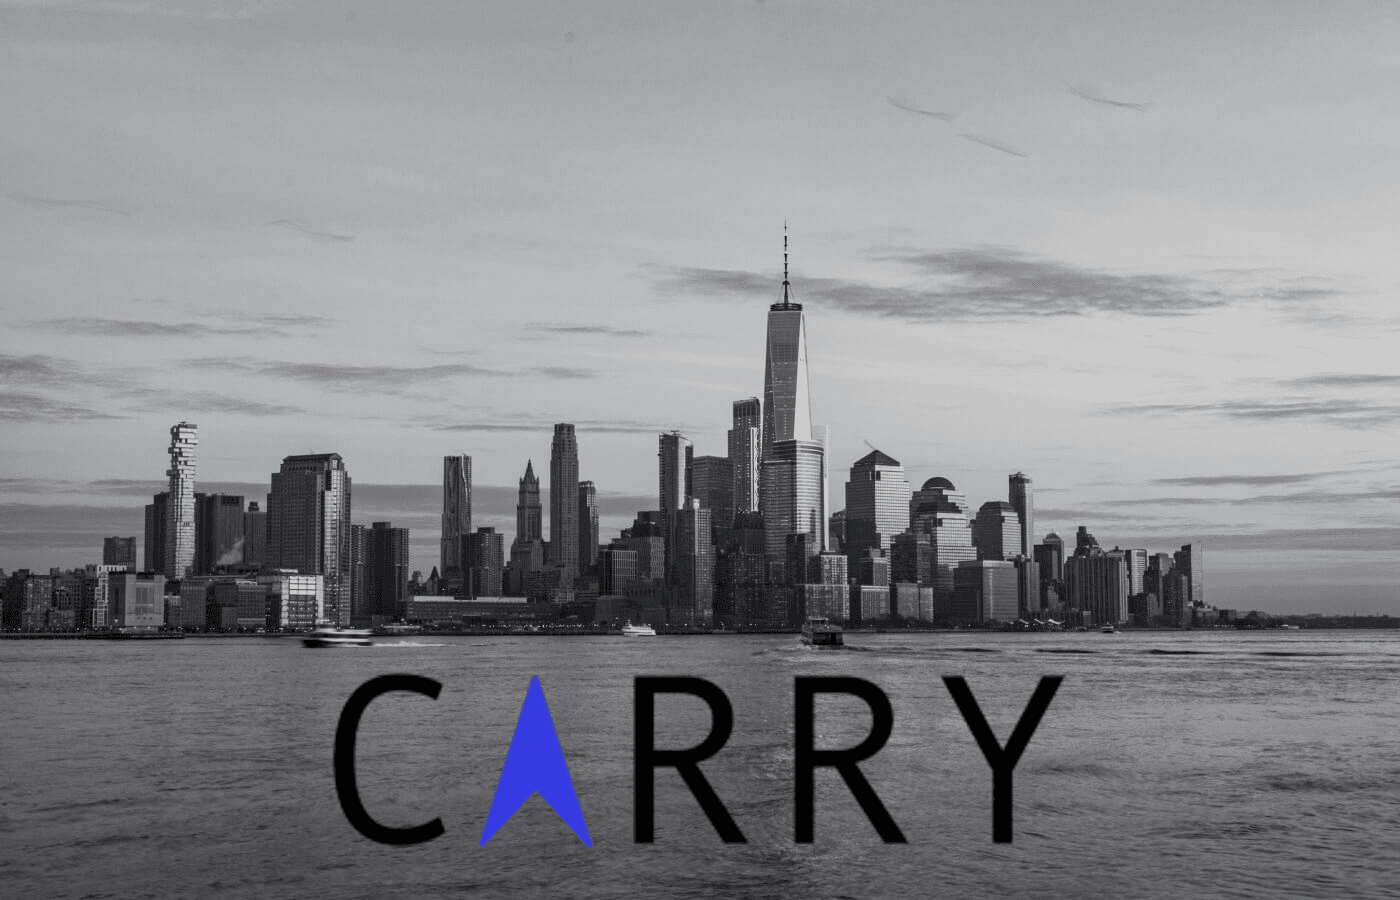 A photo of the manhattan skyline looking at wall street from the south, with the carry logo overlaid.